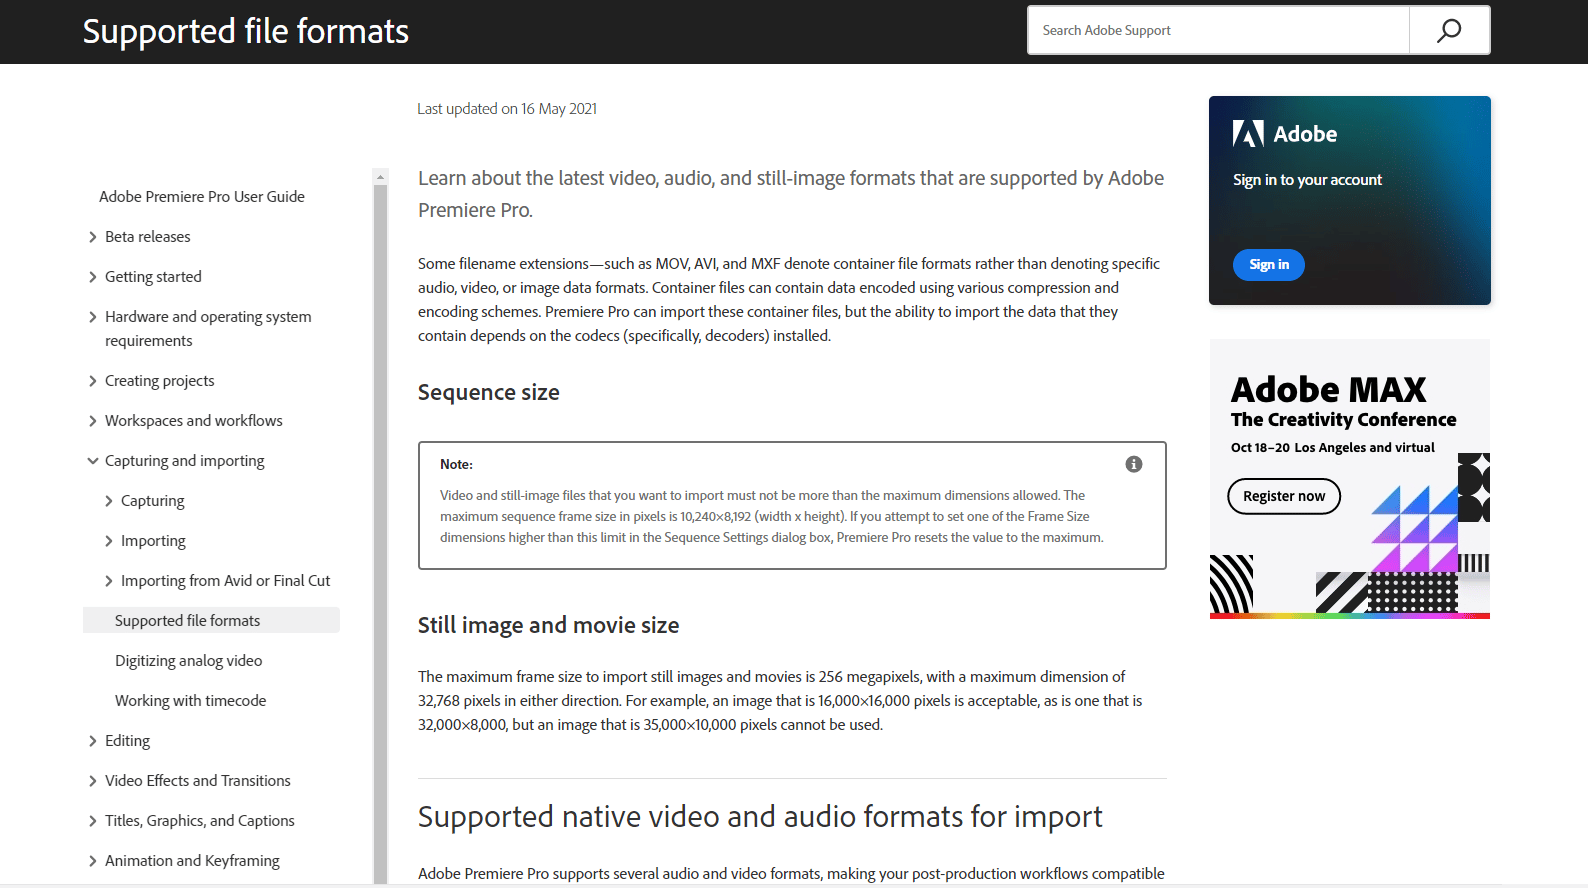 adobe supported file formats page